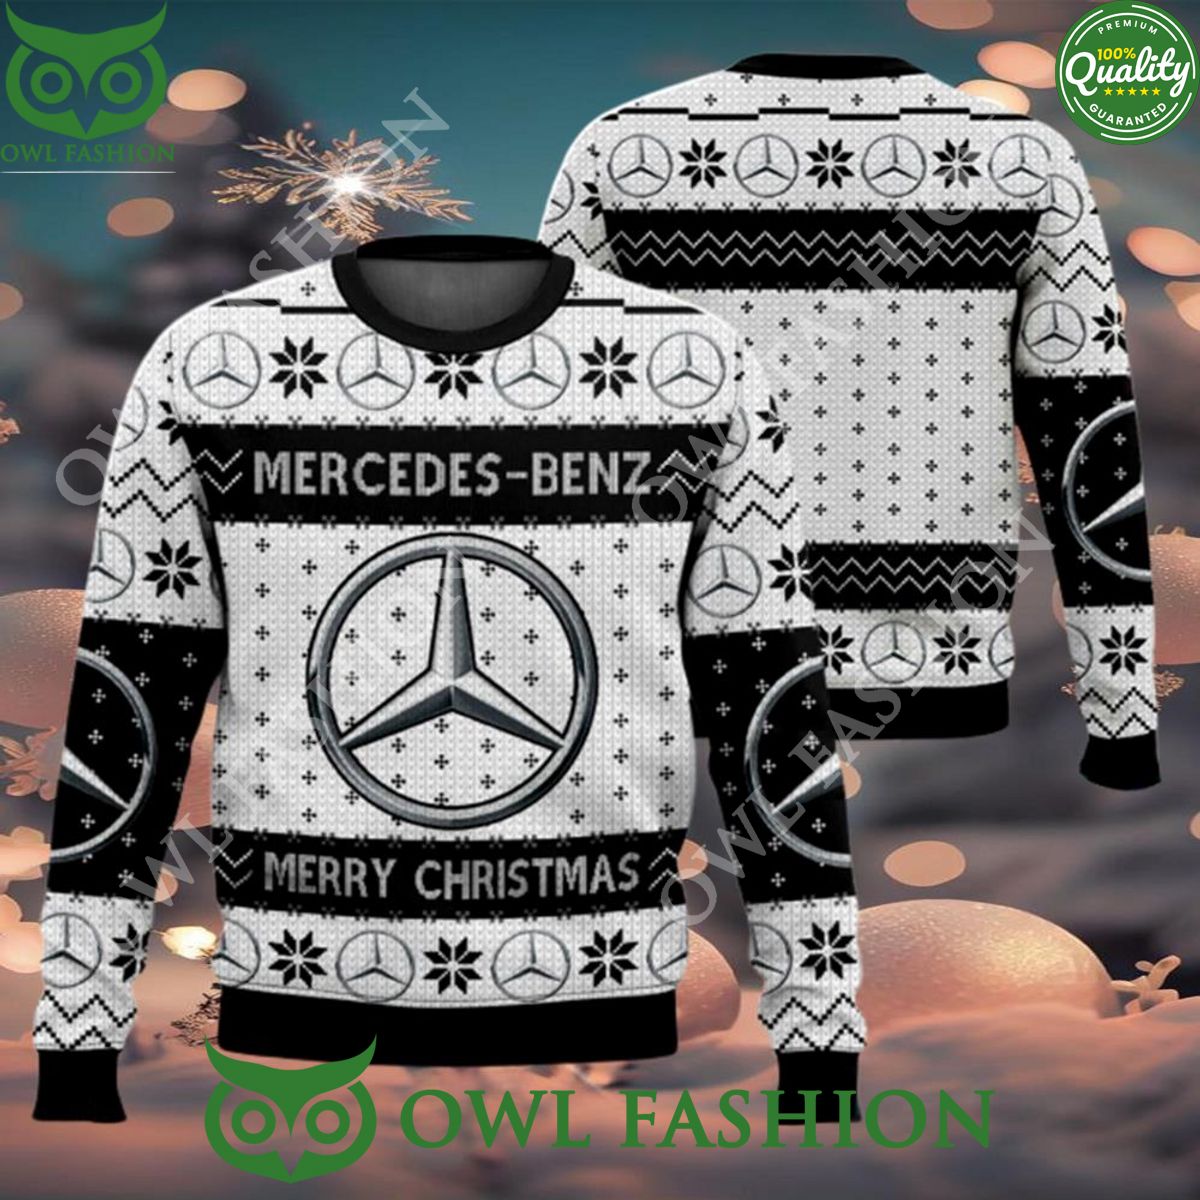 mercedes benz ugly christmas sweater jumper limited edition gift 1 N110p.jpg